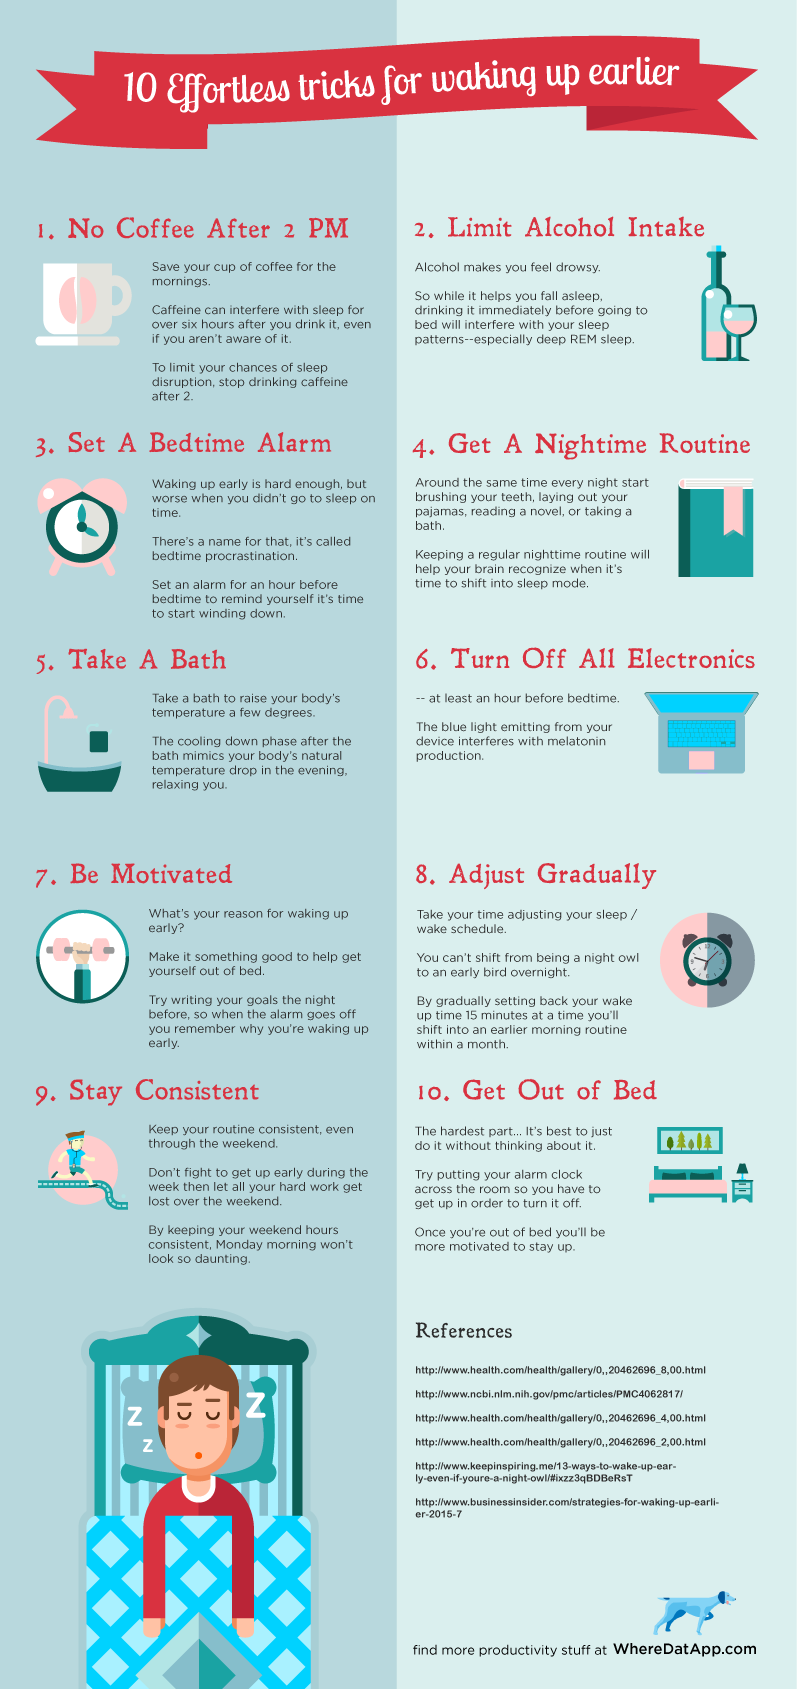 Waking Up Early Is Easy With These 10 Effortless Tricks Infographic